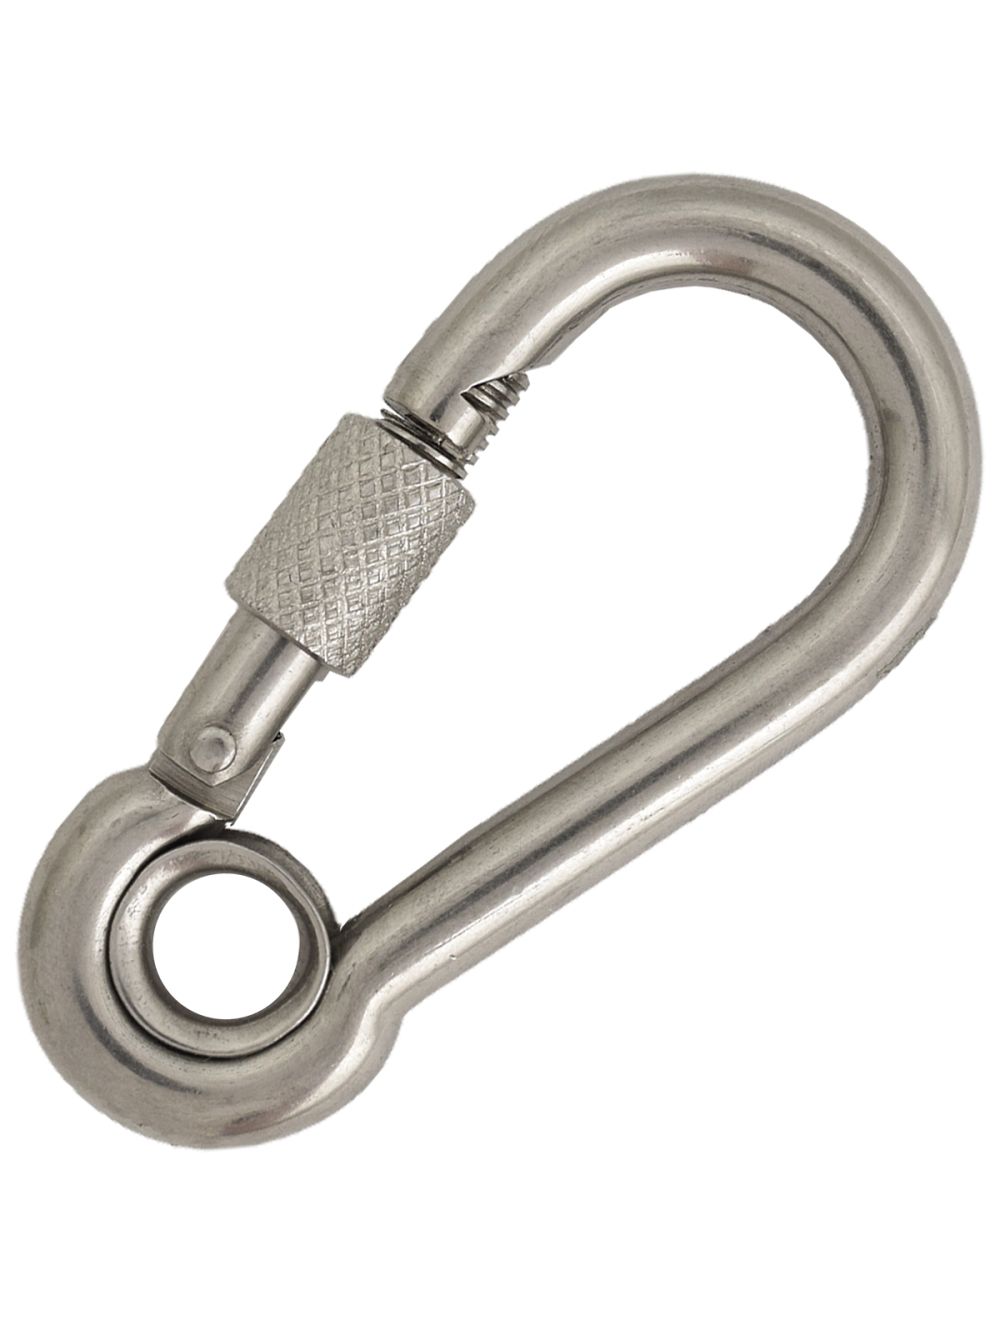 Shop Generic 6Pcs Stainless Steel Spring Snap Hook Carabiner, Small Online